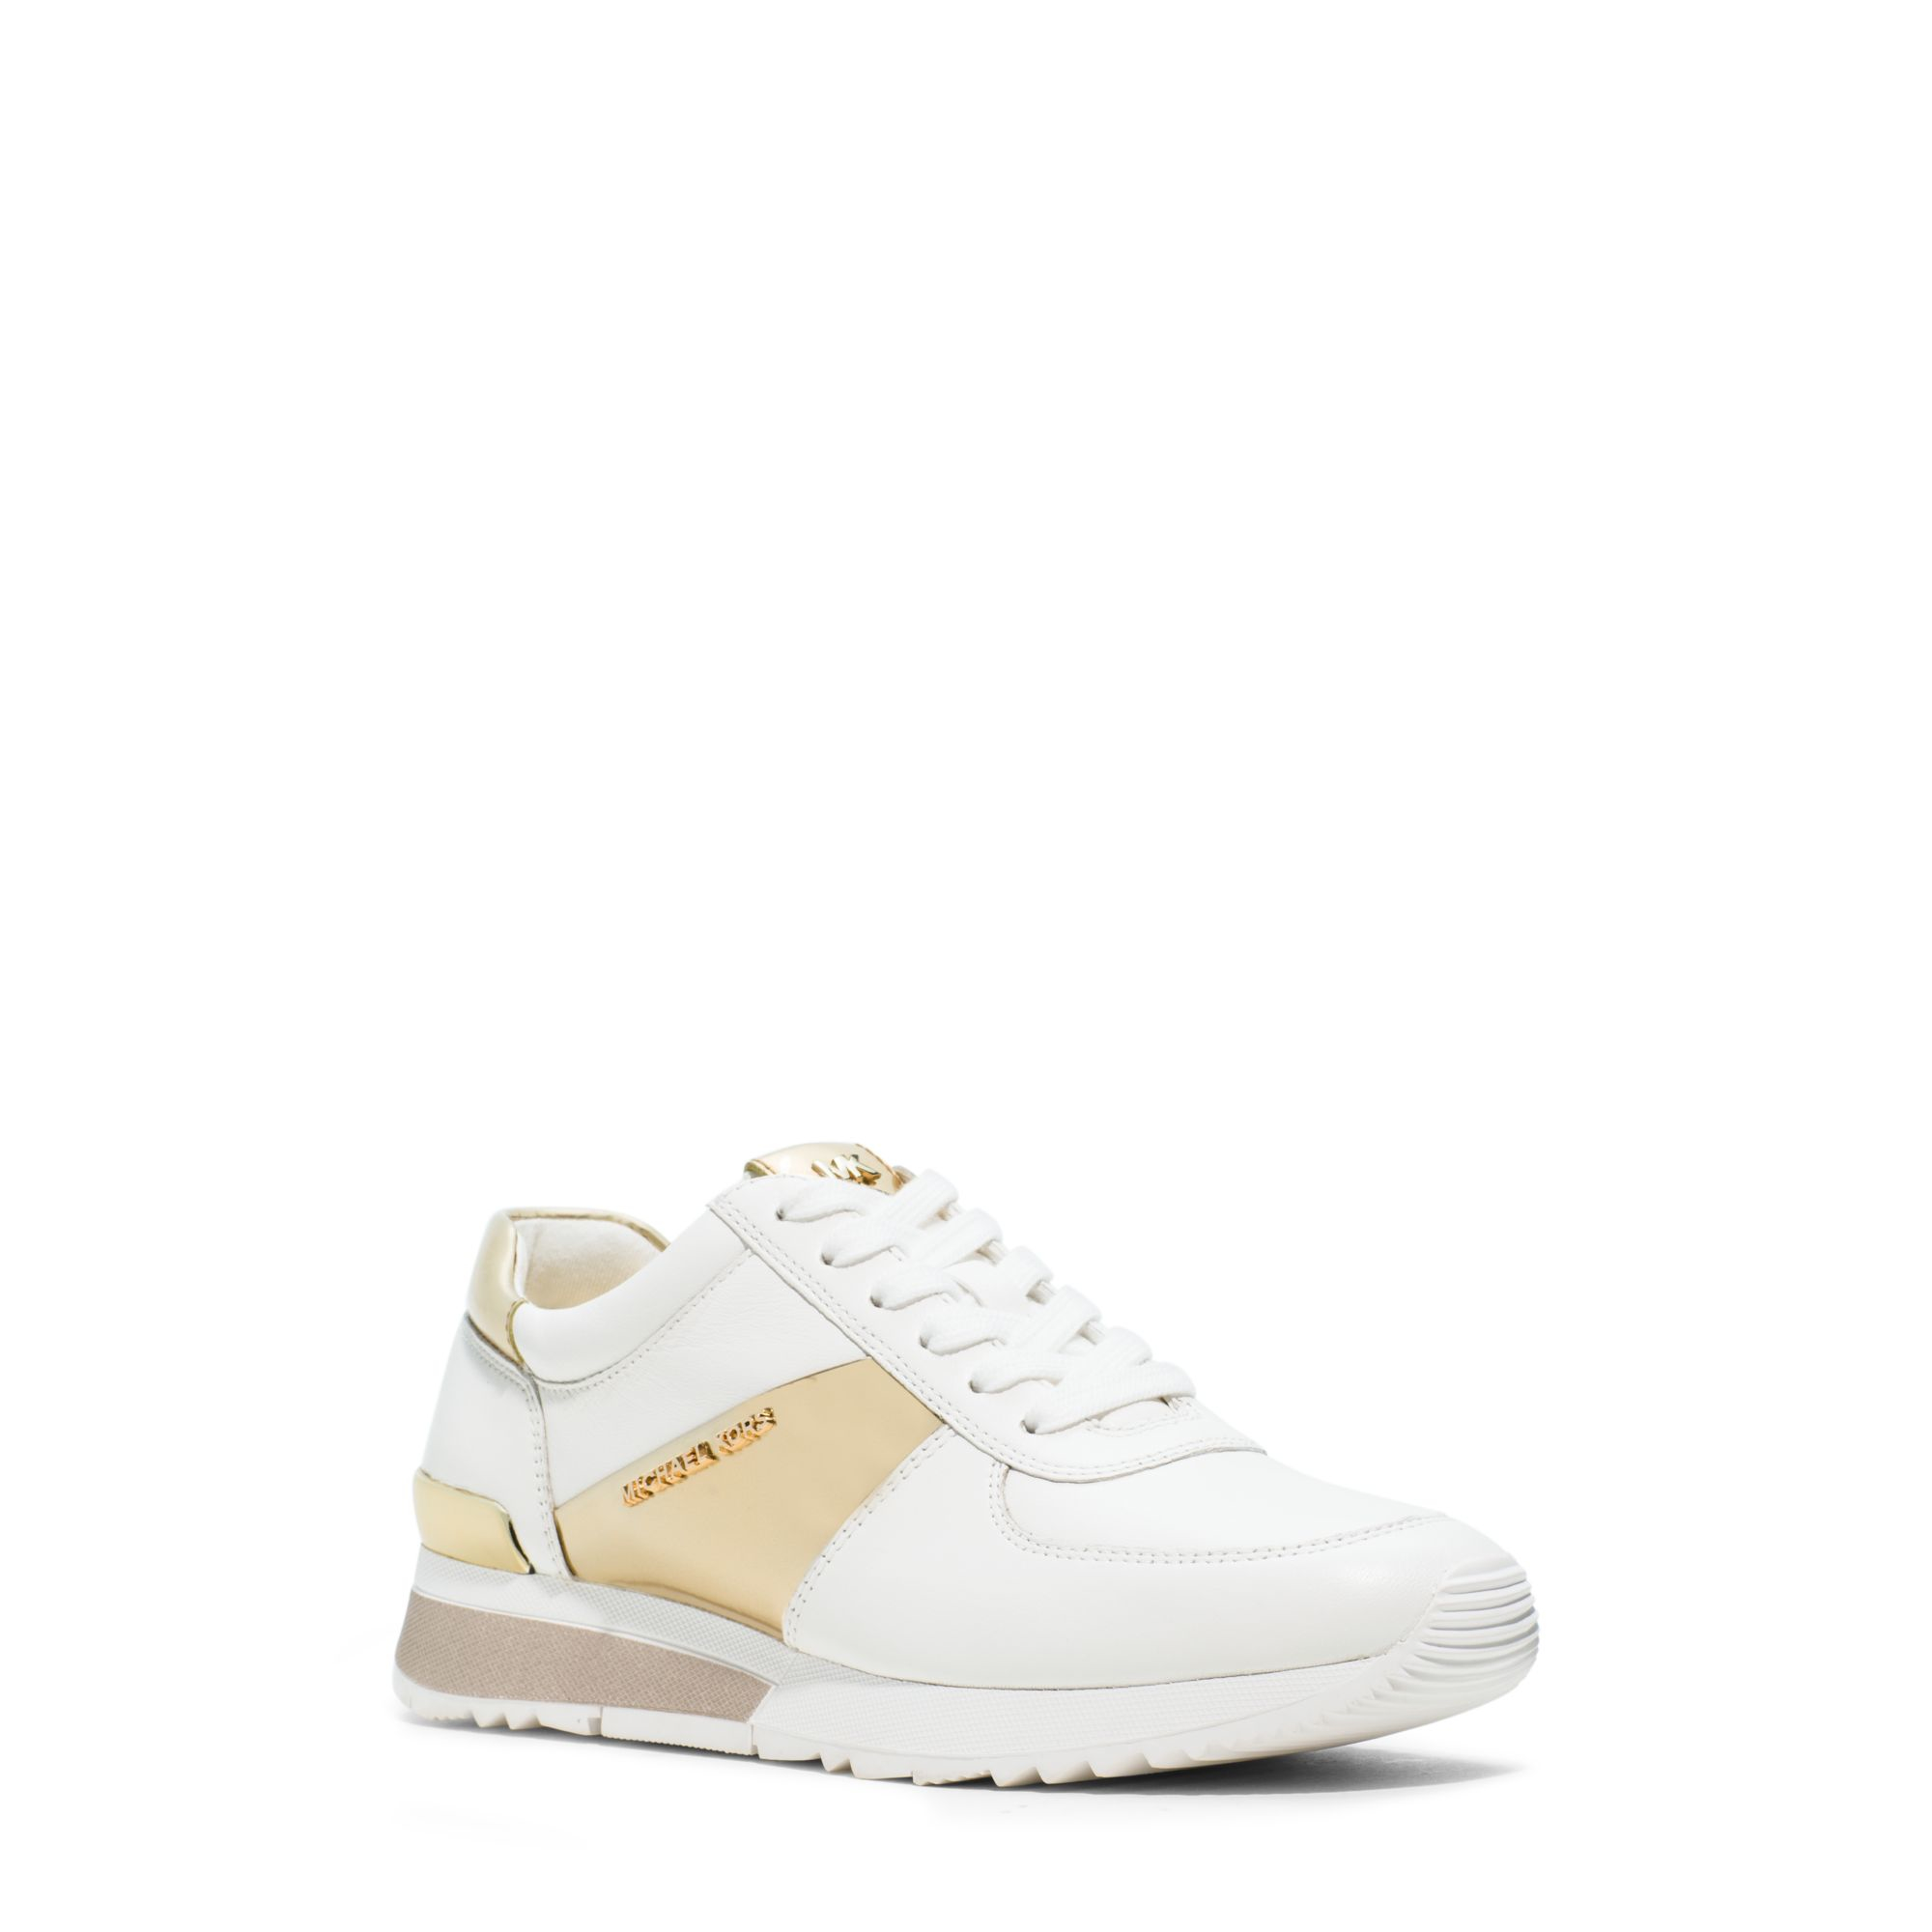 michael kors white and gold tennis shoes